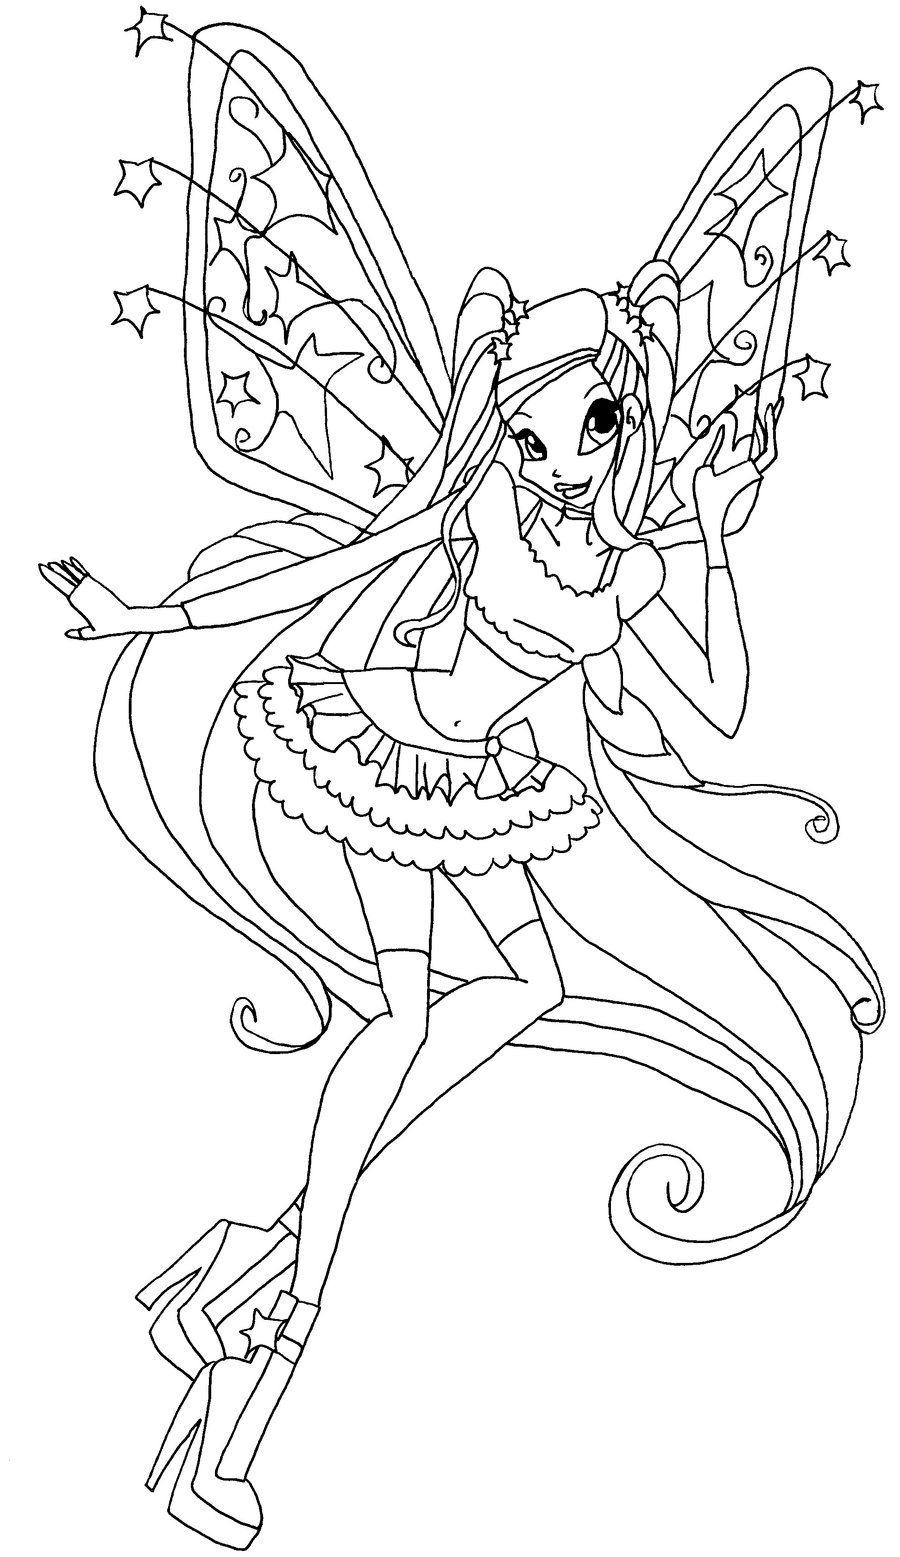 Winx Club Believix | Free Coloring Pages on Masivy World